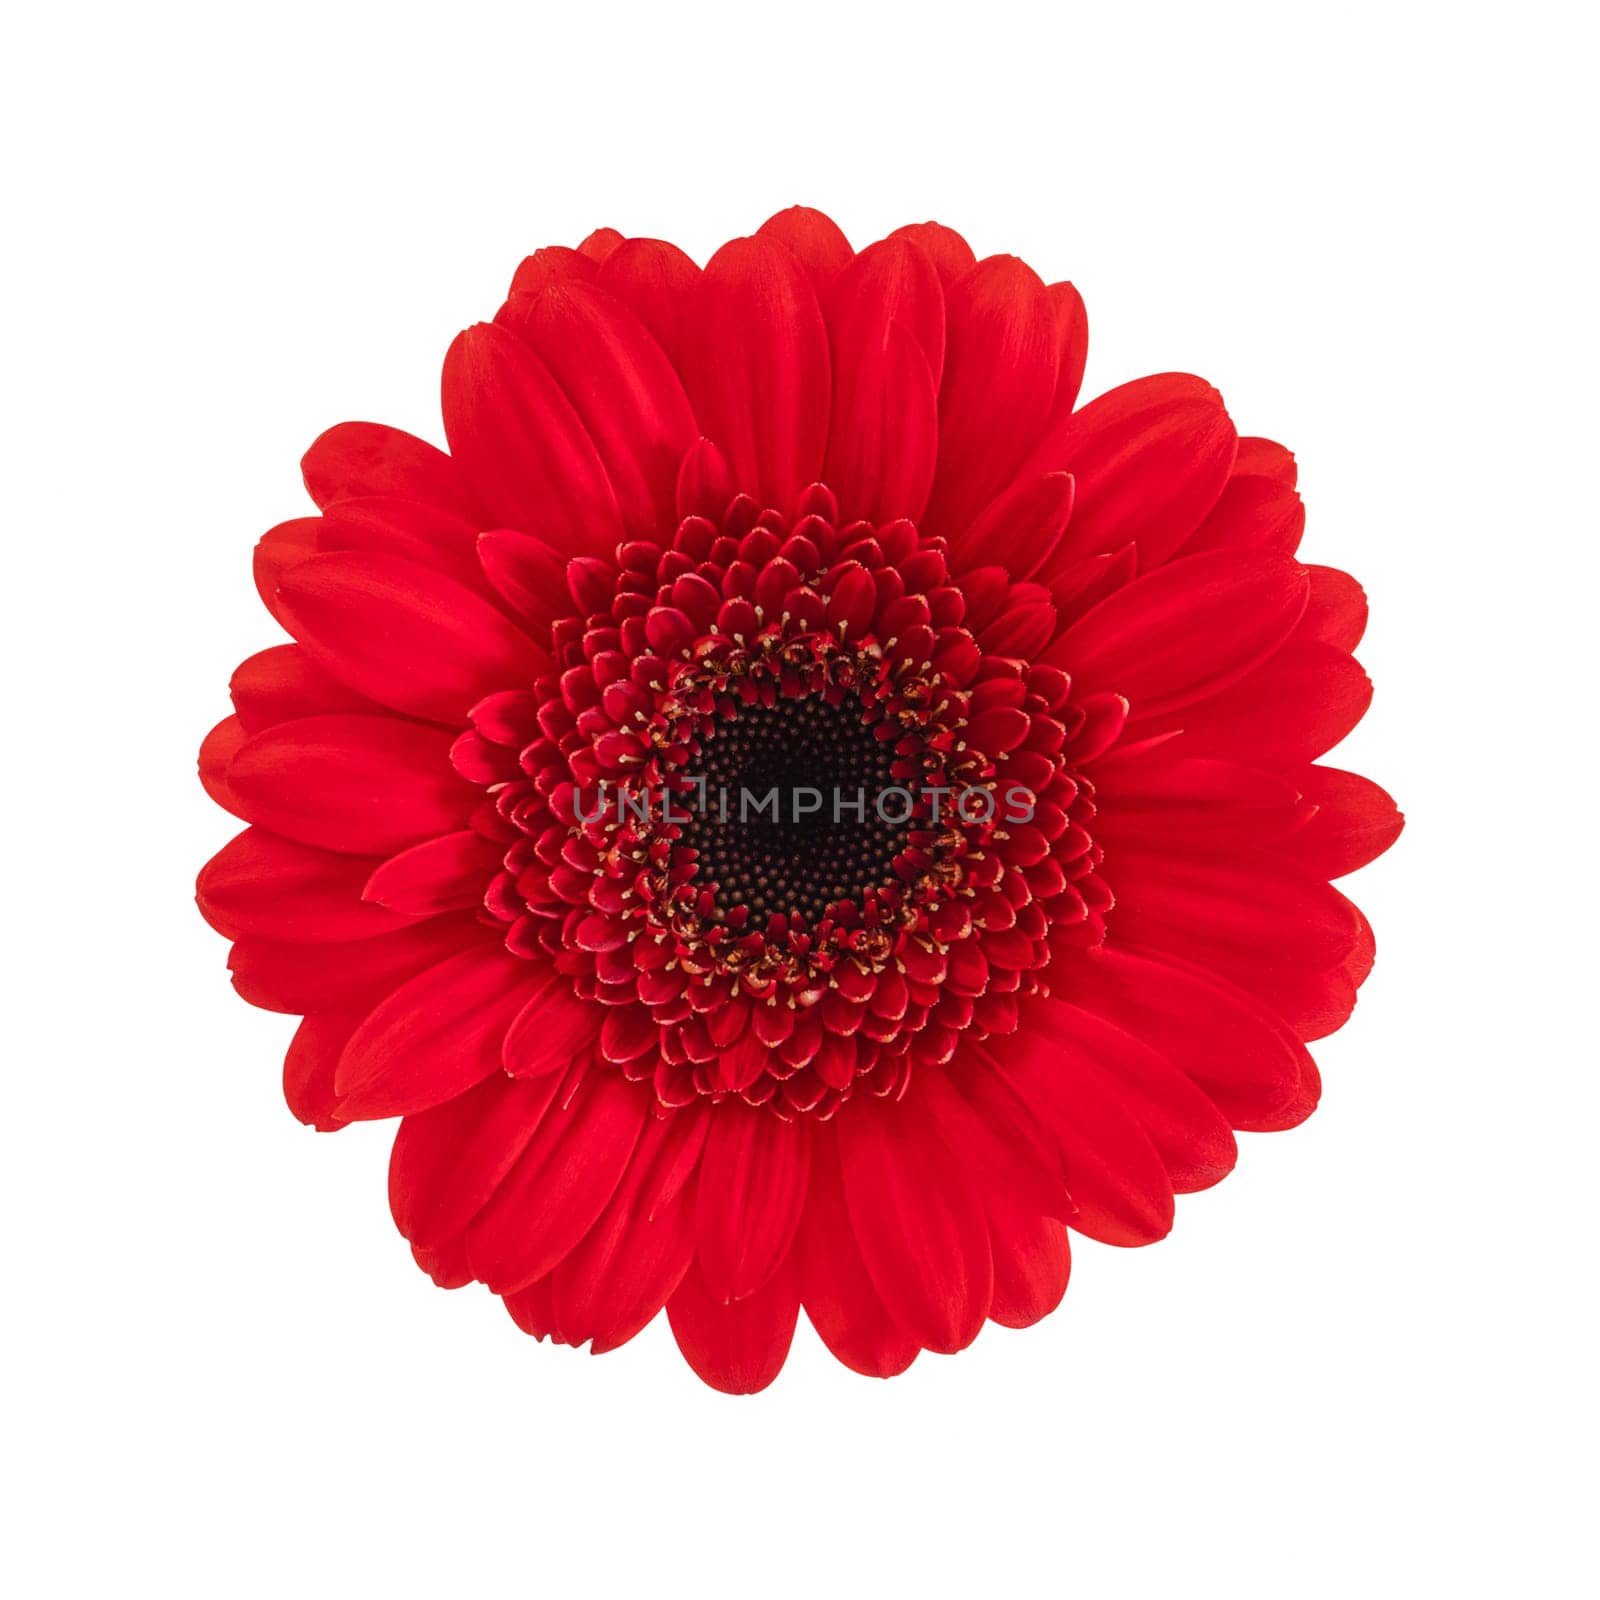 Red gerbera flower isolated on a white background. Stock photo by anna_artist